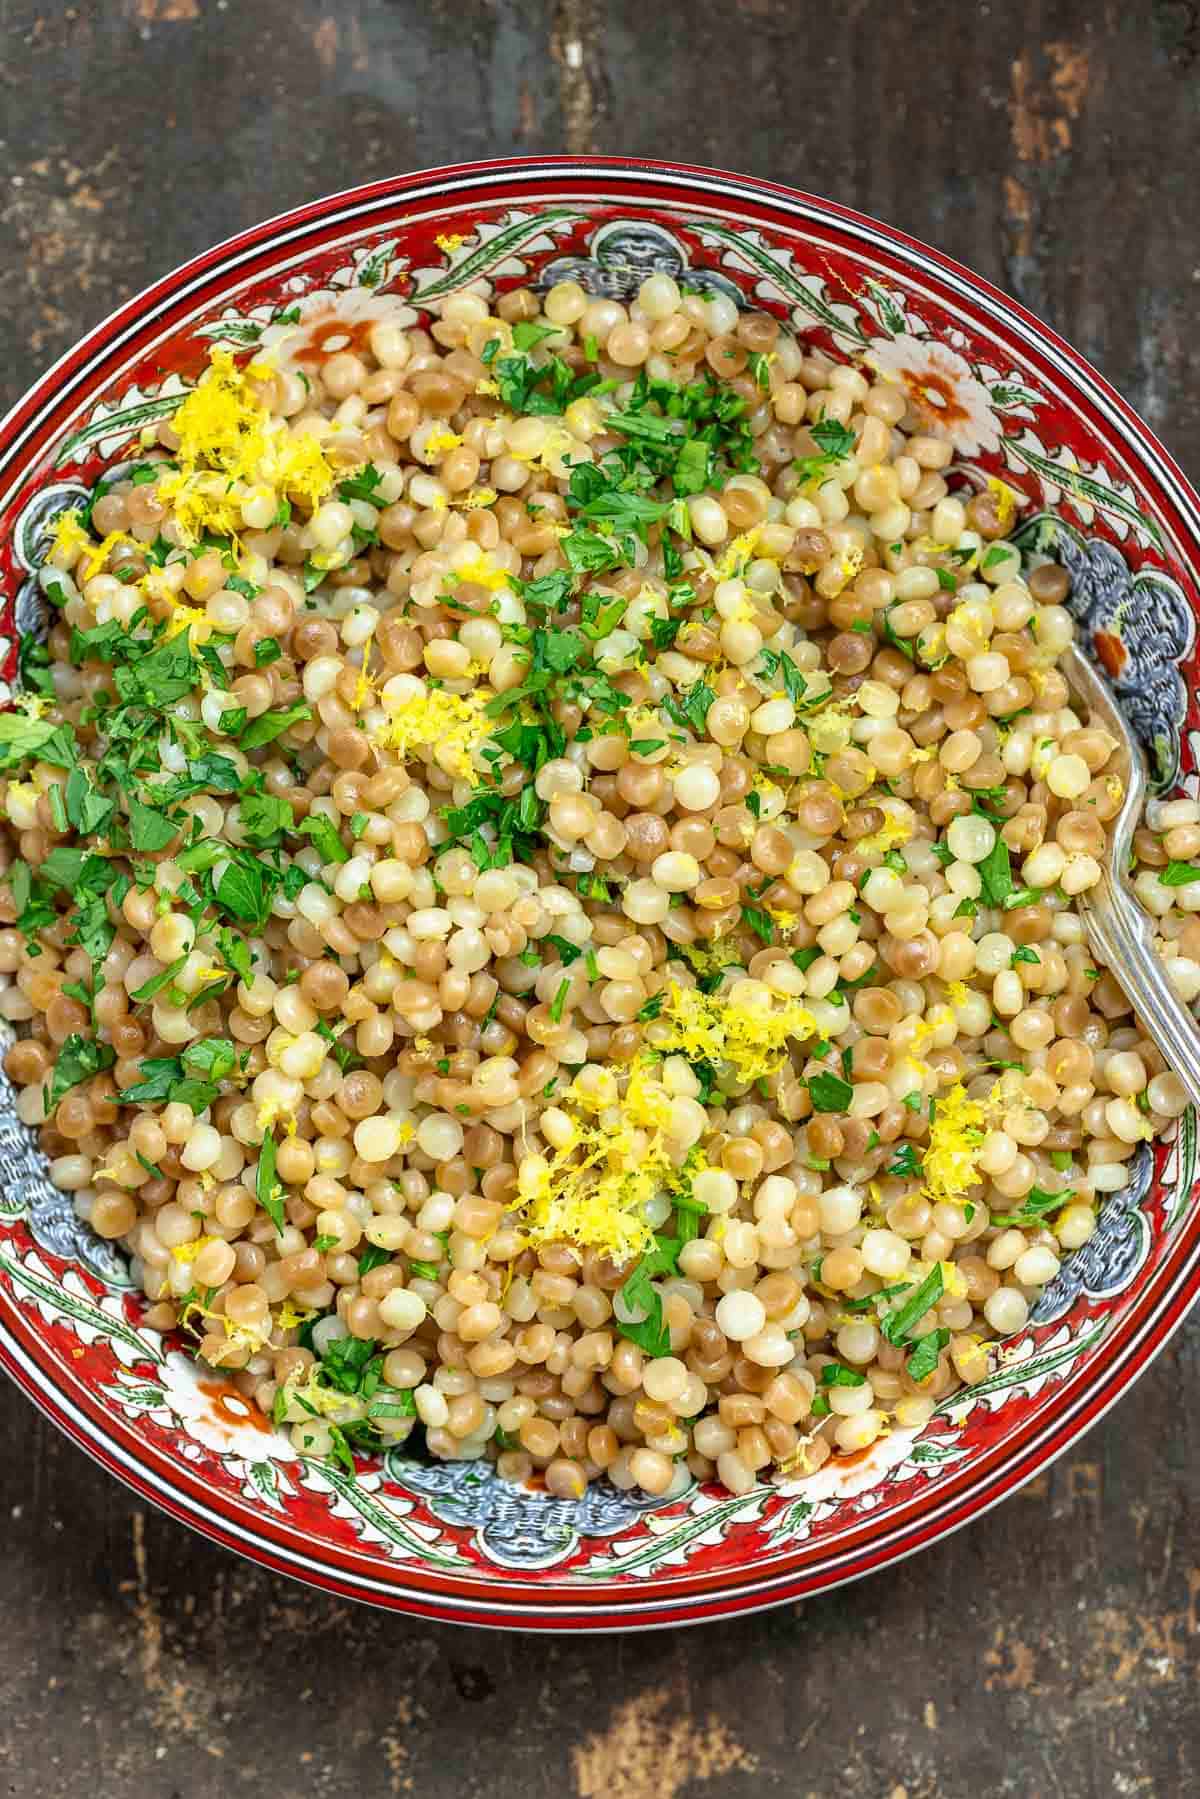 How to Cook Israeli Couscous (Pearl Couscous)